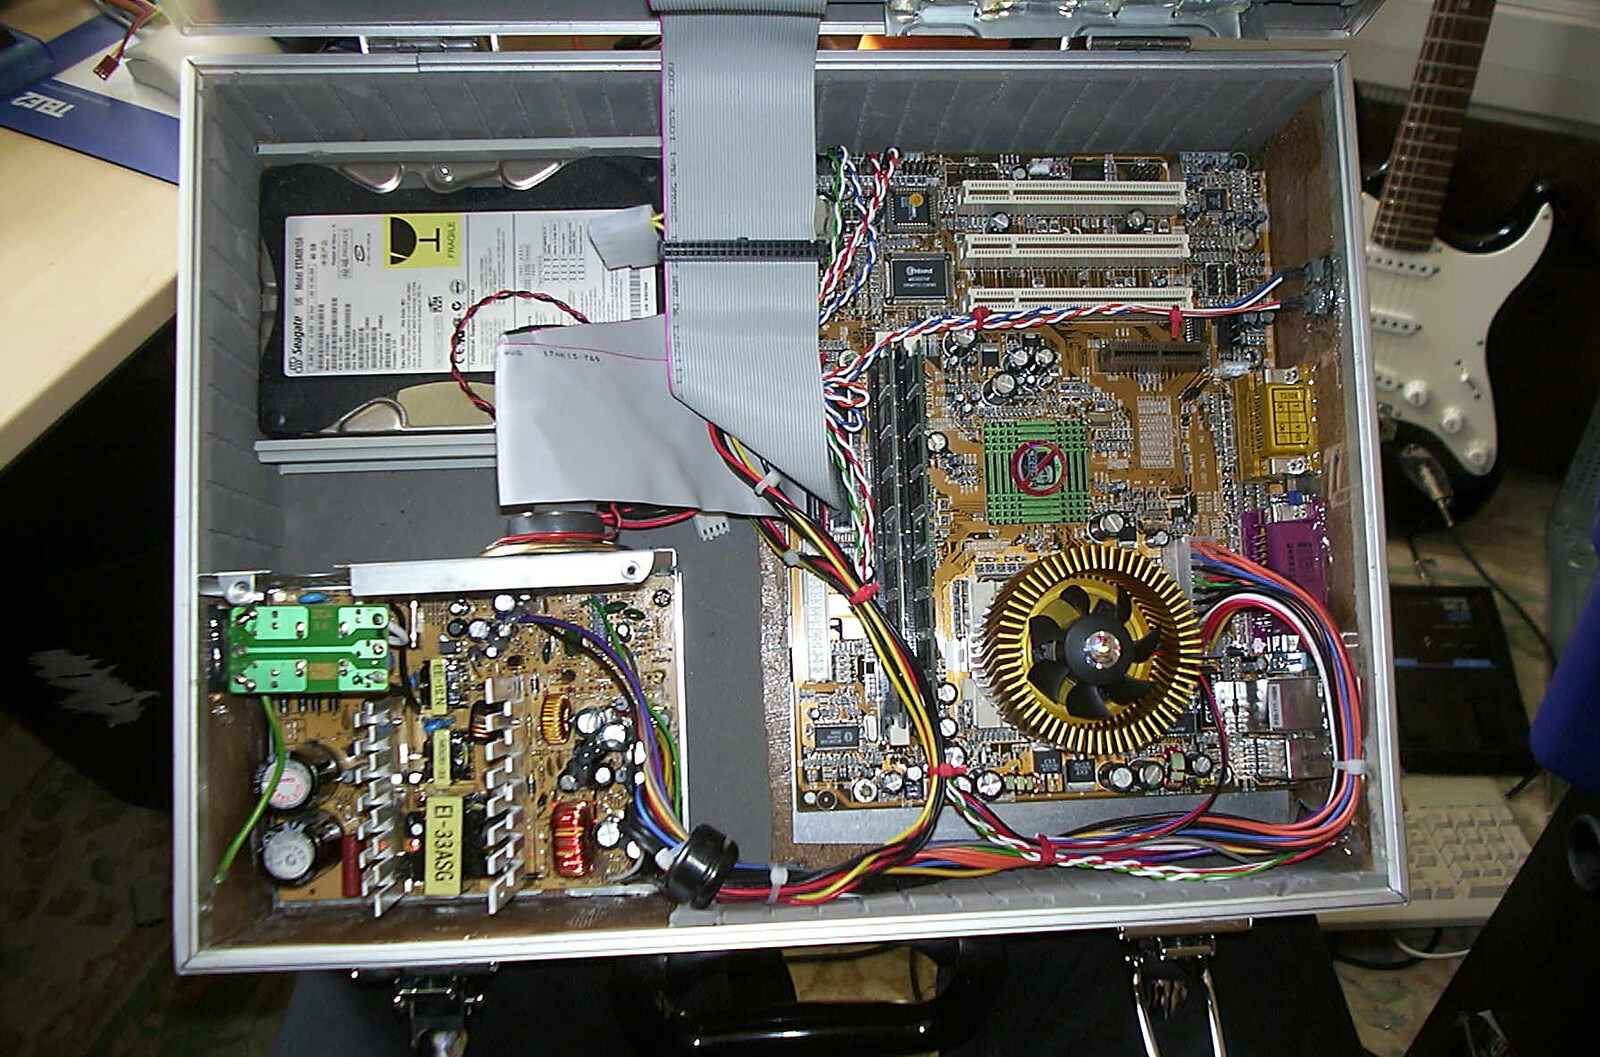 The inside of the modified computer from A Hard-Drive Clock and Other Projects, Brome, Suffolk - 28th June 2002